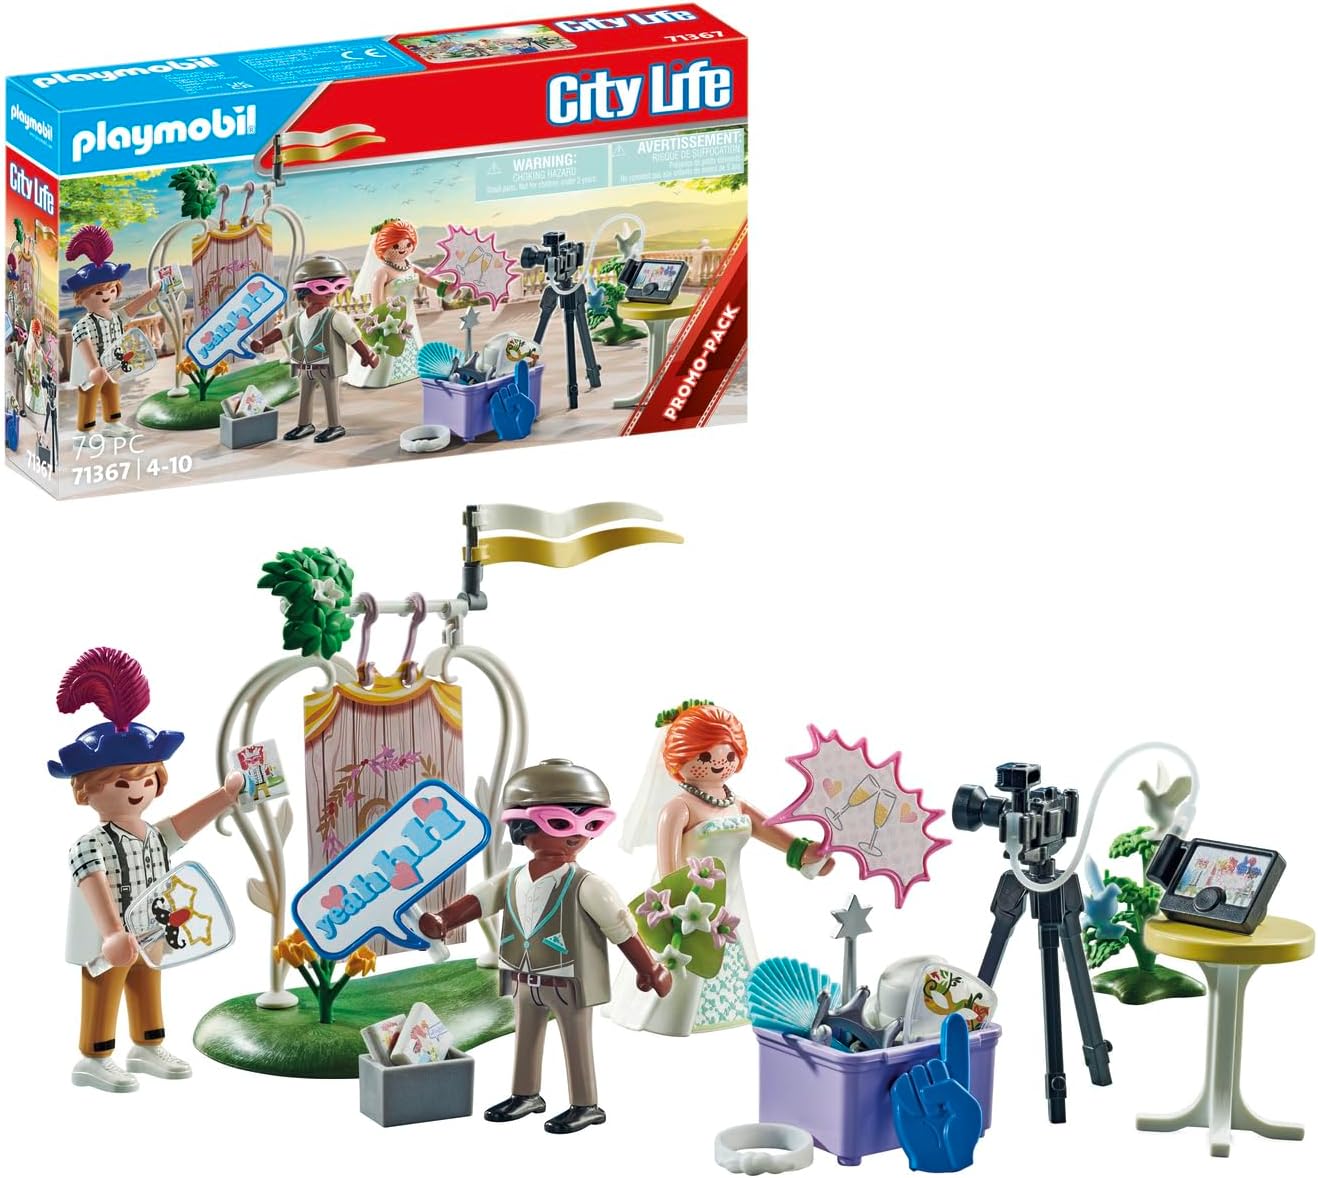 PLAYMOBIL City Life 71367 Promo Pack Wedding Photo Box, Magical Photos of the Wedding Party, Imaginative Fun with Masks and Many Accessories, Toy for Children from 4 Years